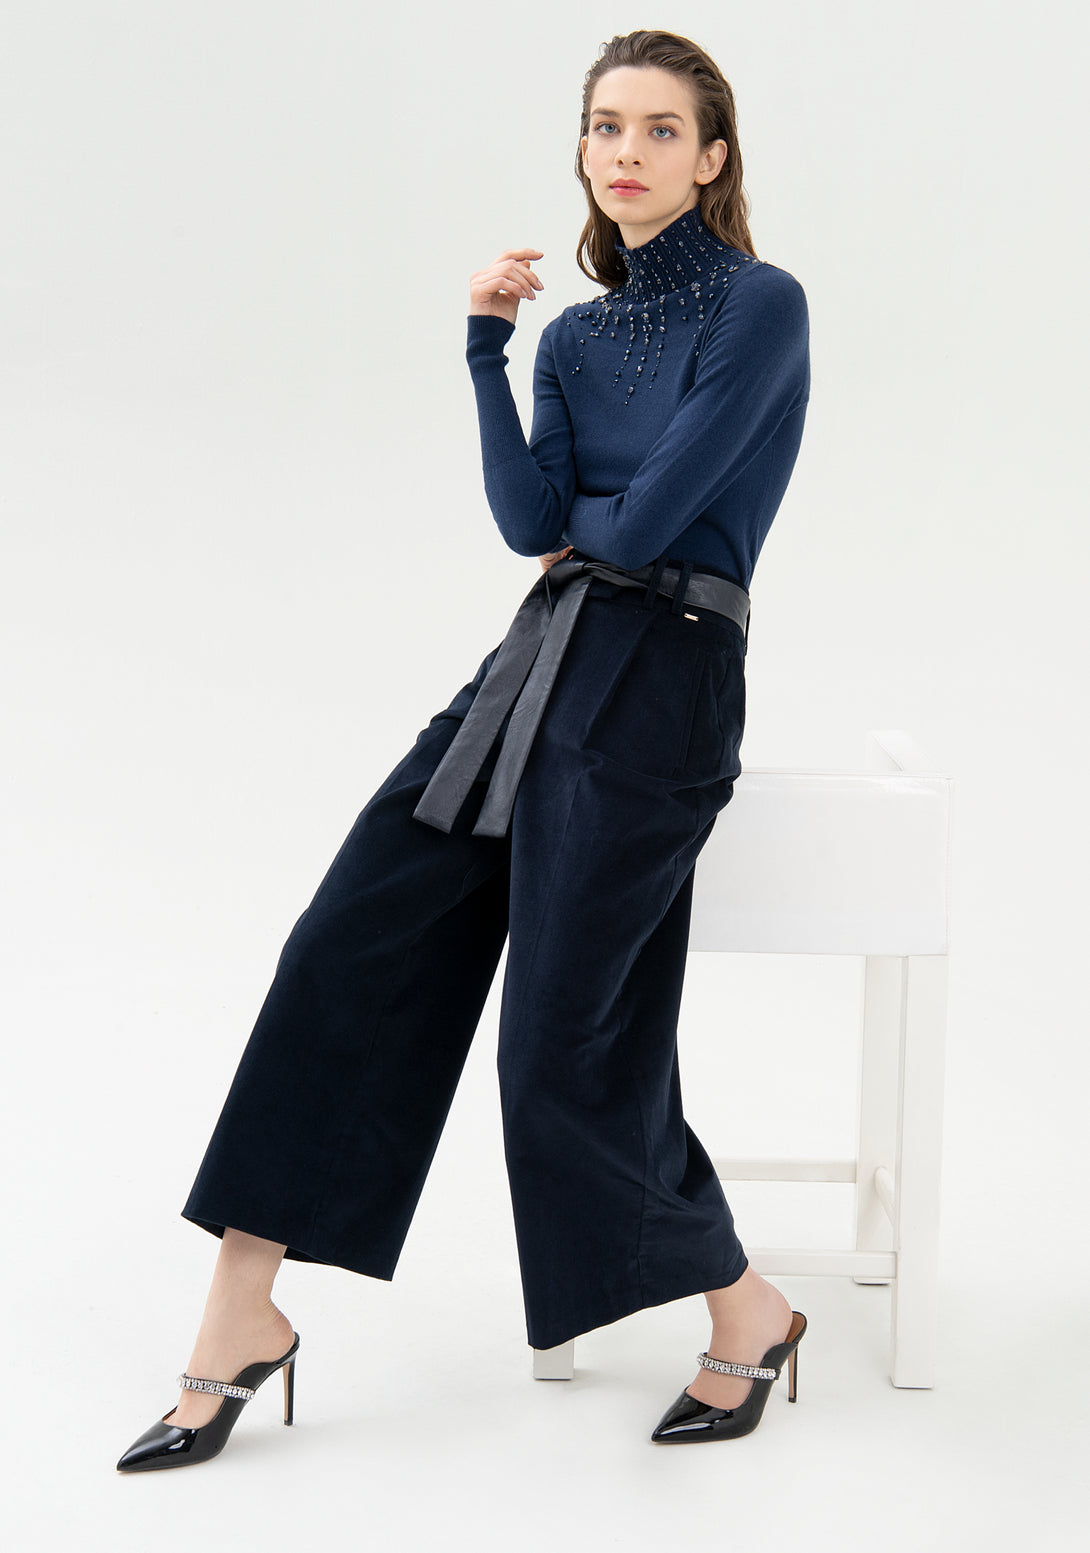 Culotte pant wide fit made in velvet